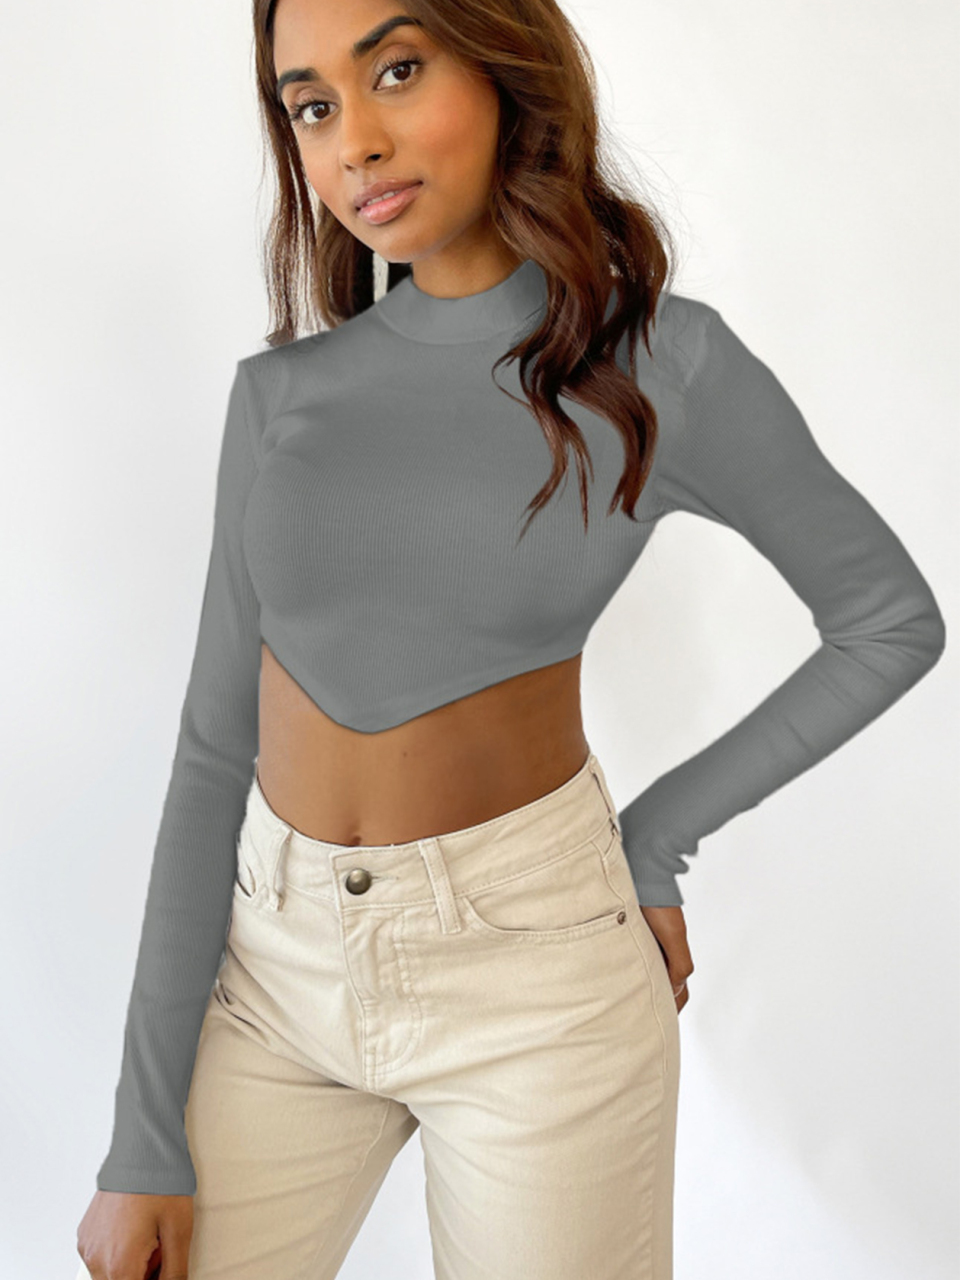 Monochrome Sexy Halter Top With Half-High Neck And Long Sleeves